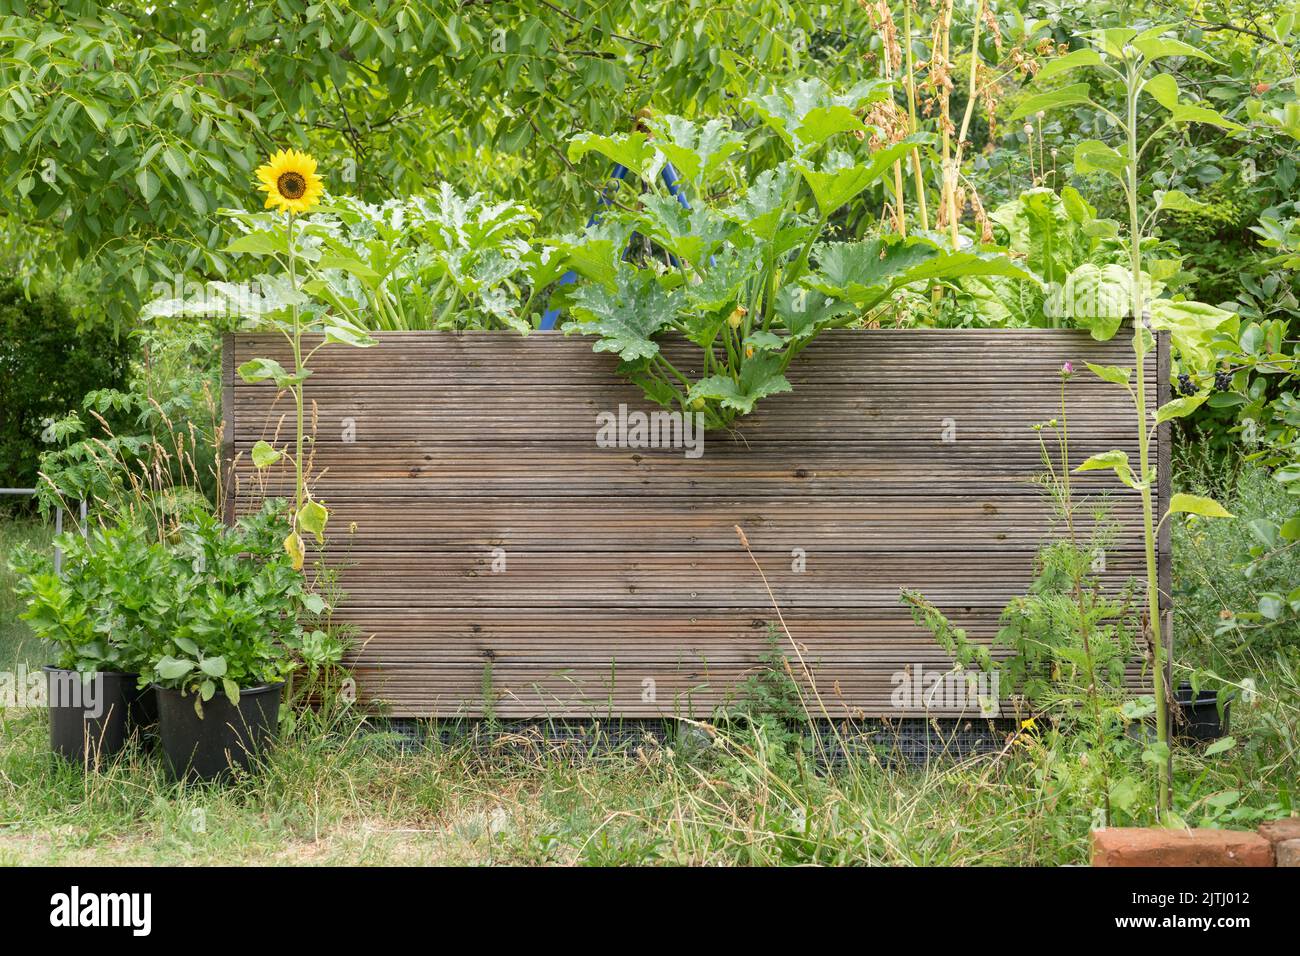 Raised bed in the garden with vegetables, herbs and flowers Stock Photo